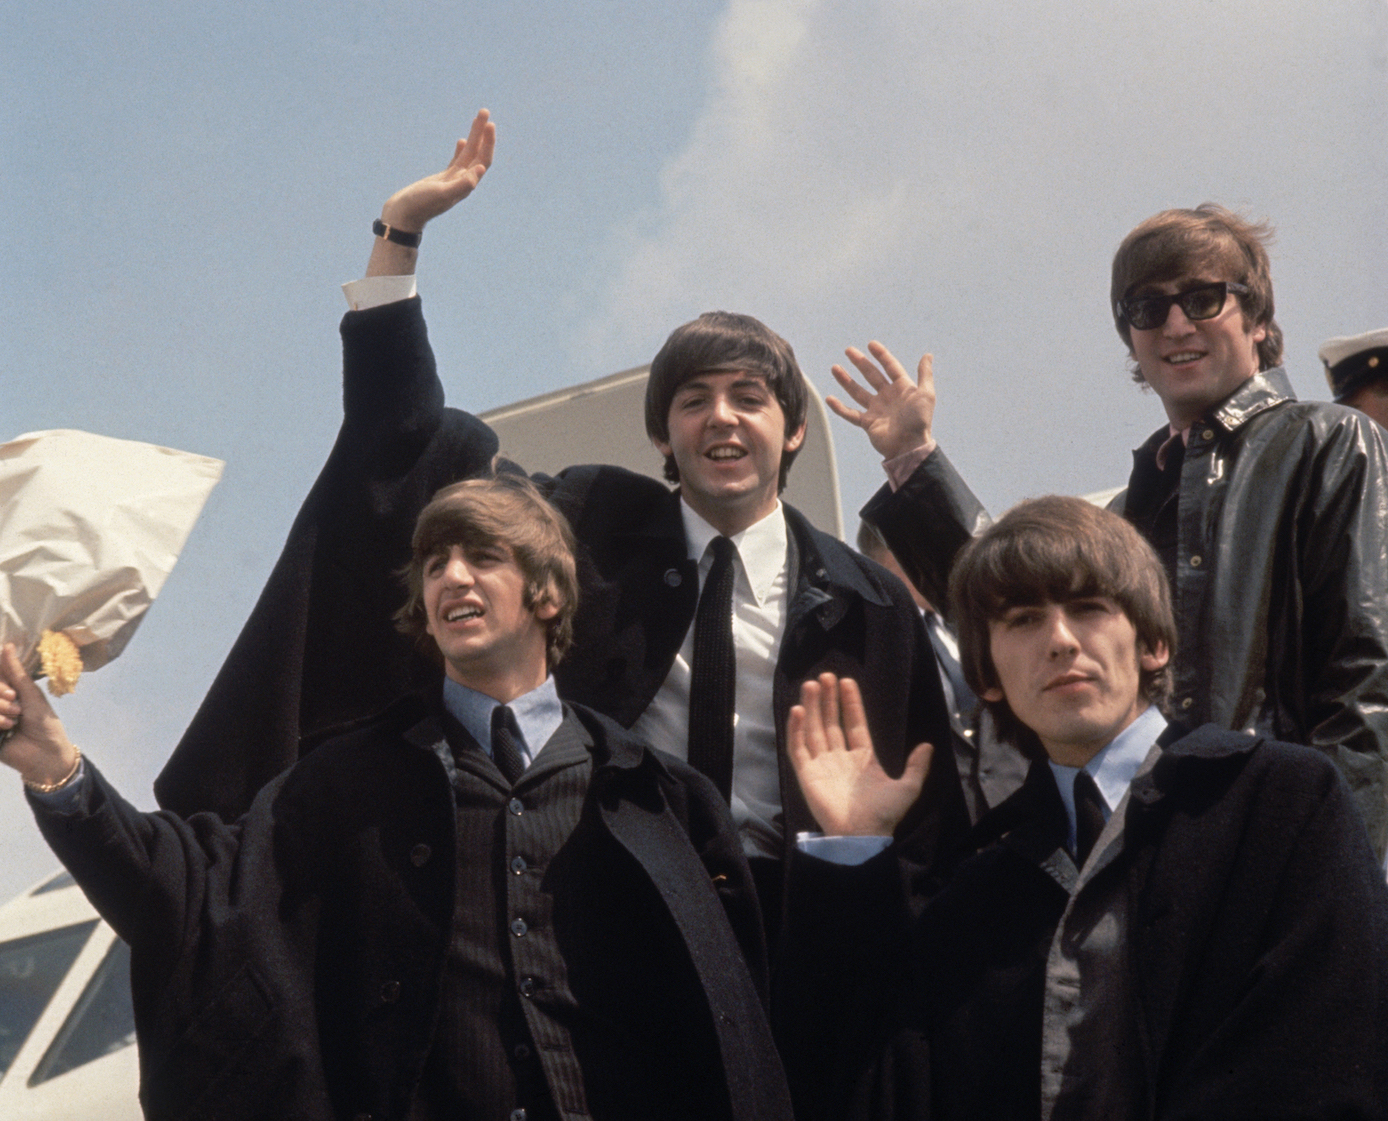 The Beatles arrive at London Airport after their Australian tour